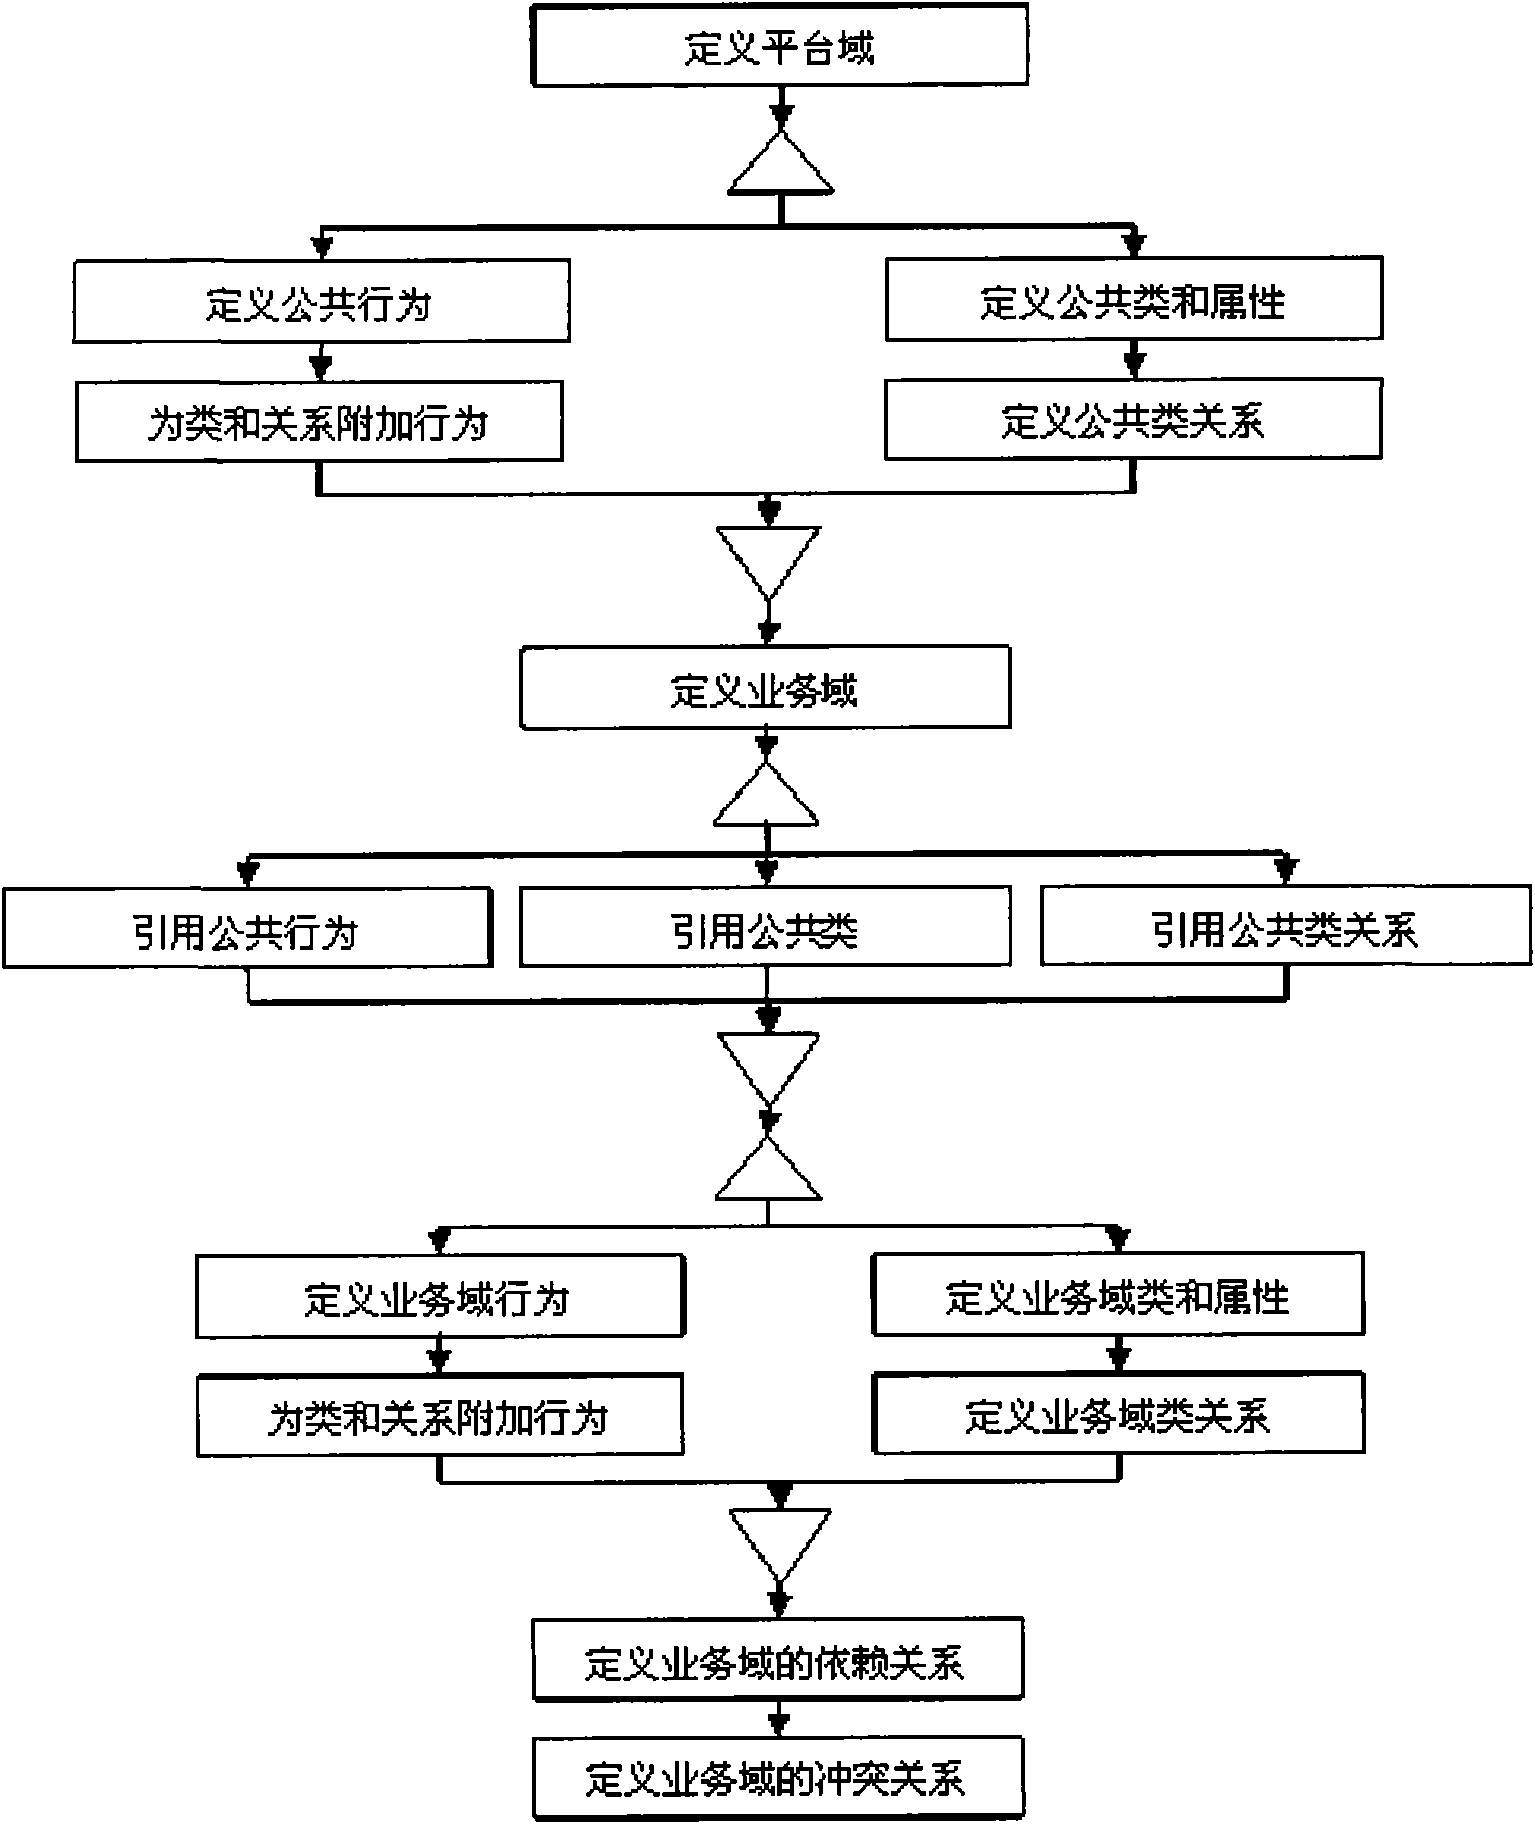 Data analysis method for product life cycle management system